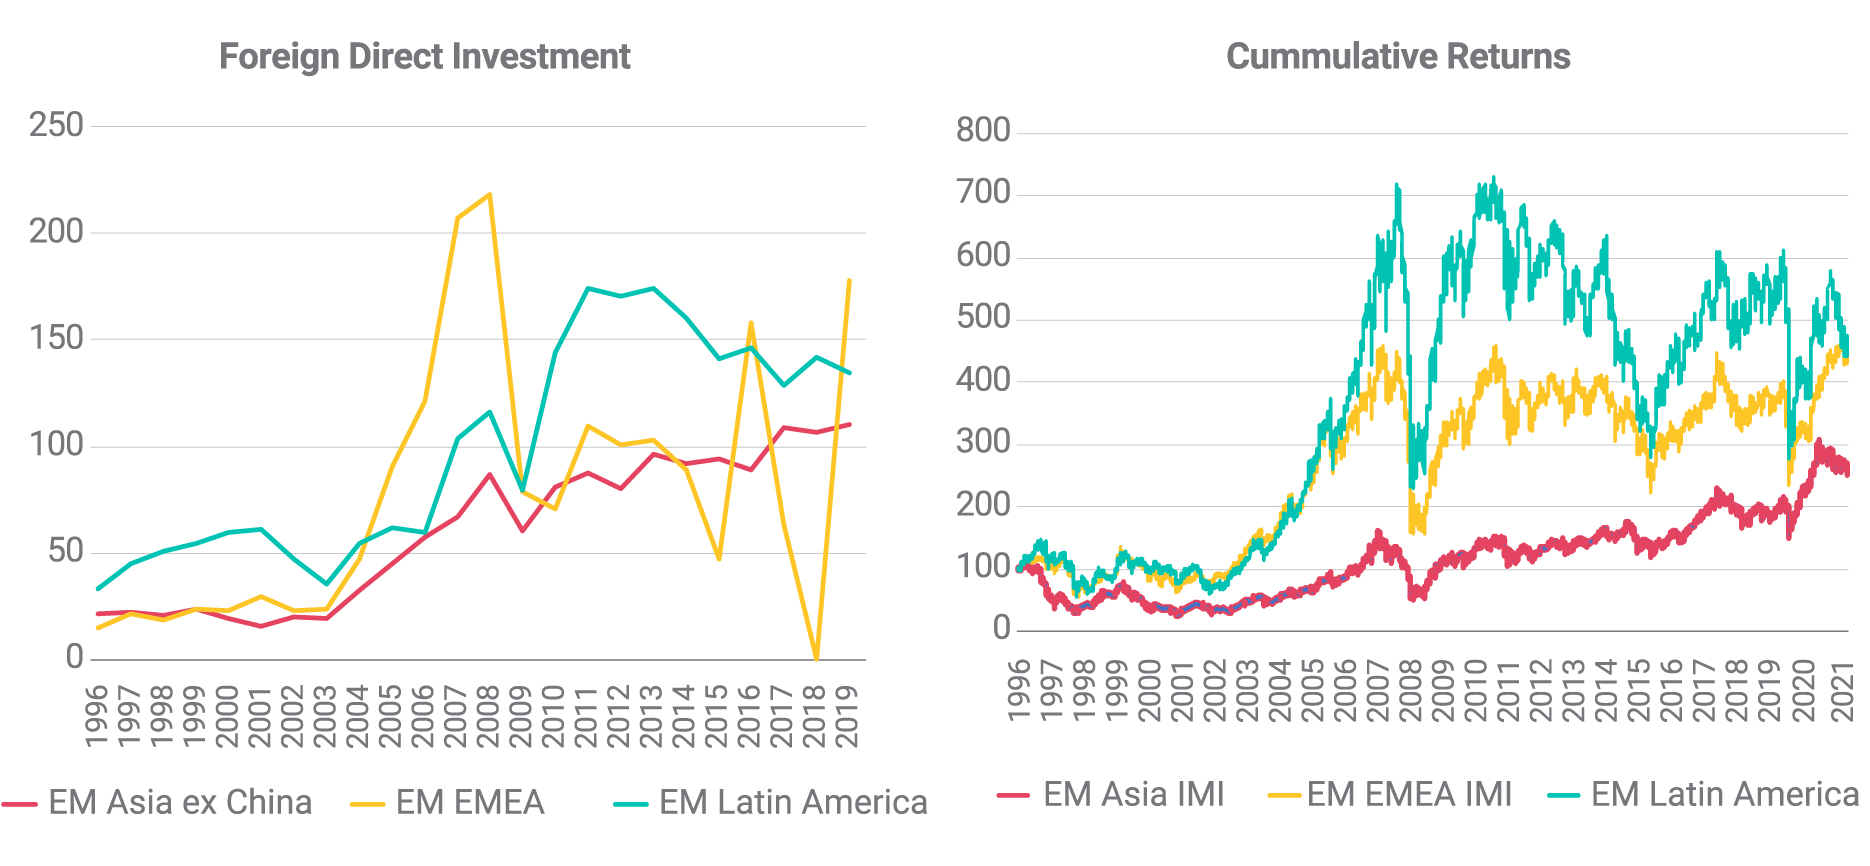 Foreign direct investment and performance across EM regions